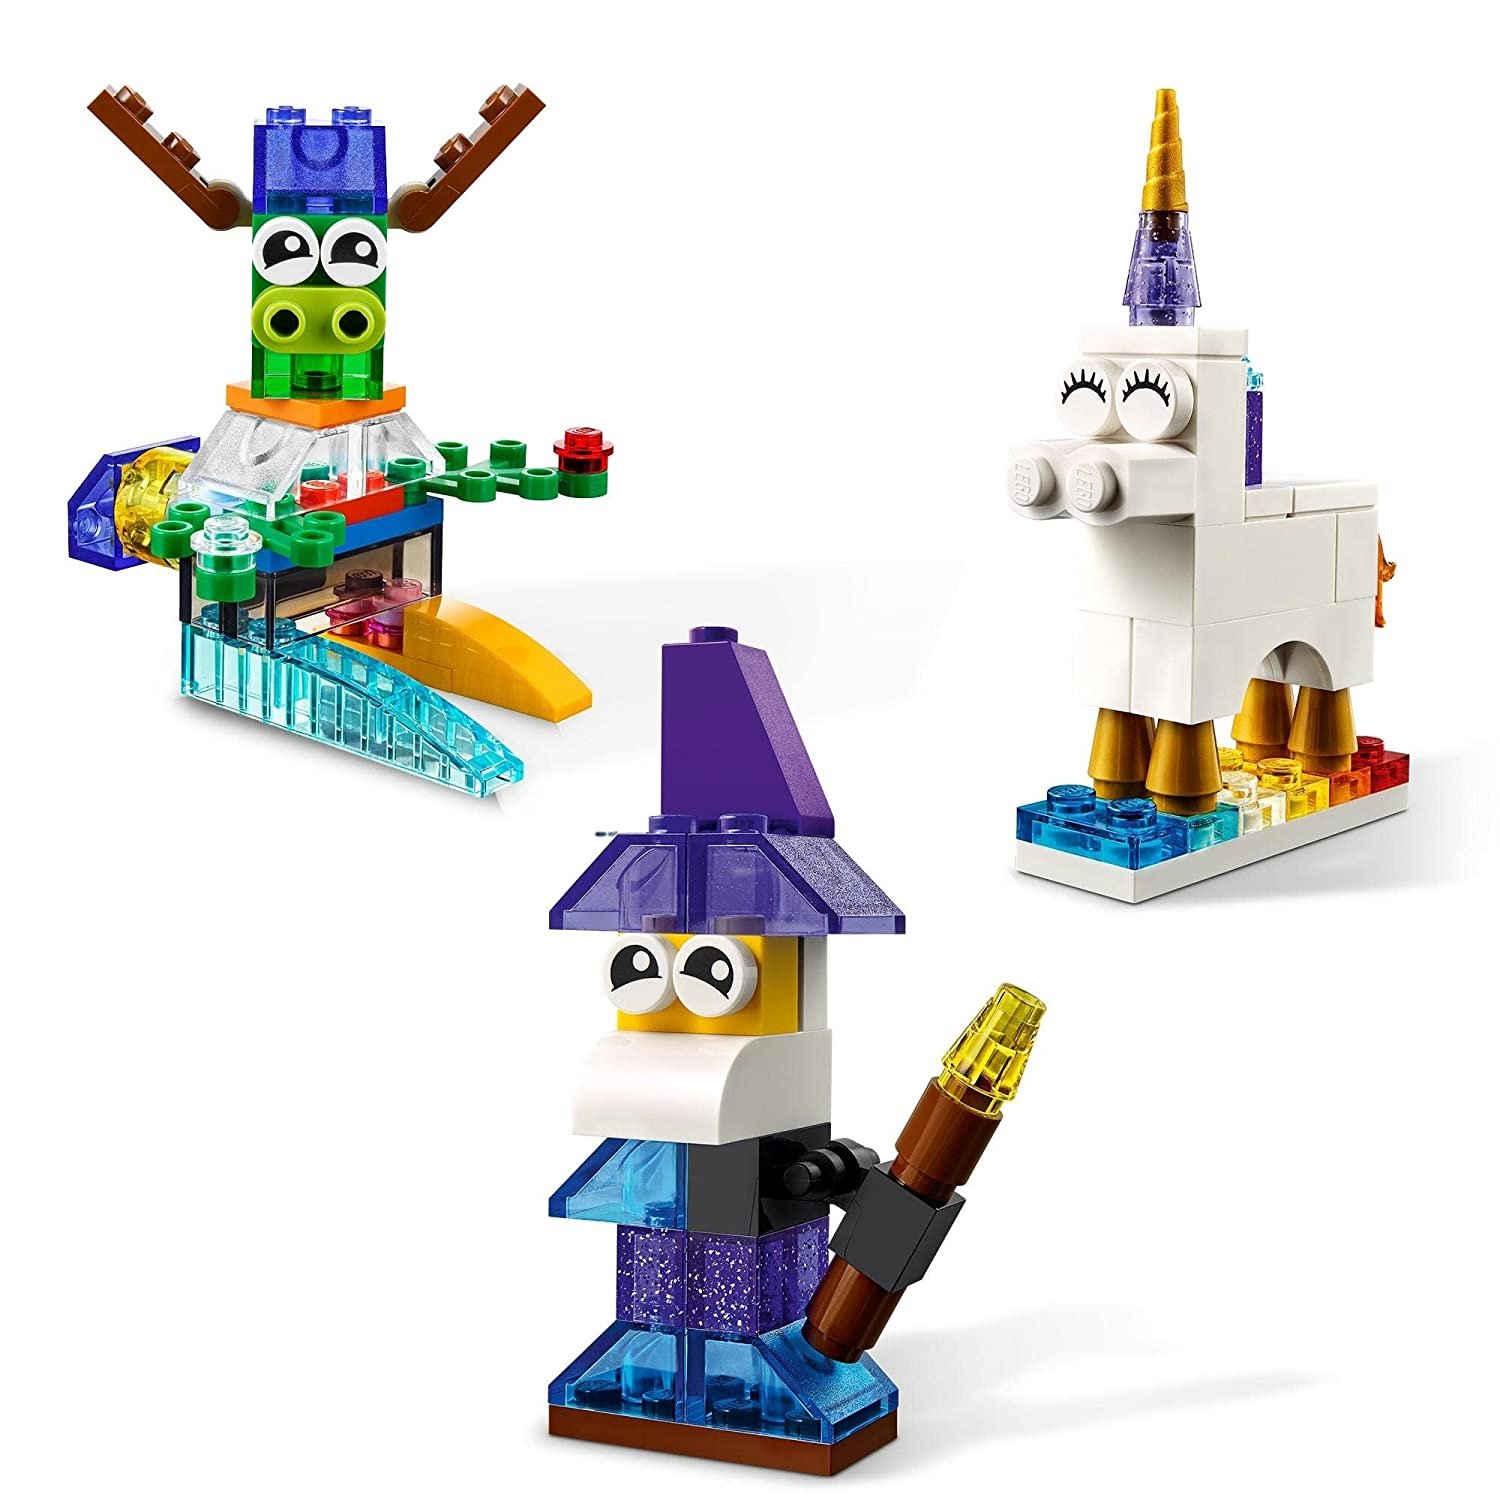 LEGO Classic Creative Transparent Bricks Building Set 11013, Wizard and  Animal Toys Including Unicorn, Lion, Bird, and Turtle, Educational Toy Gift  Idea for Preschool Kids Ages 4+ 